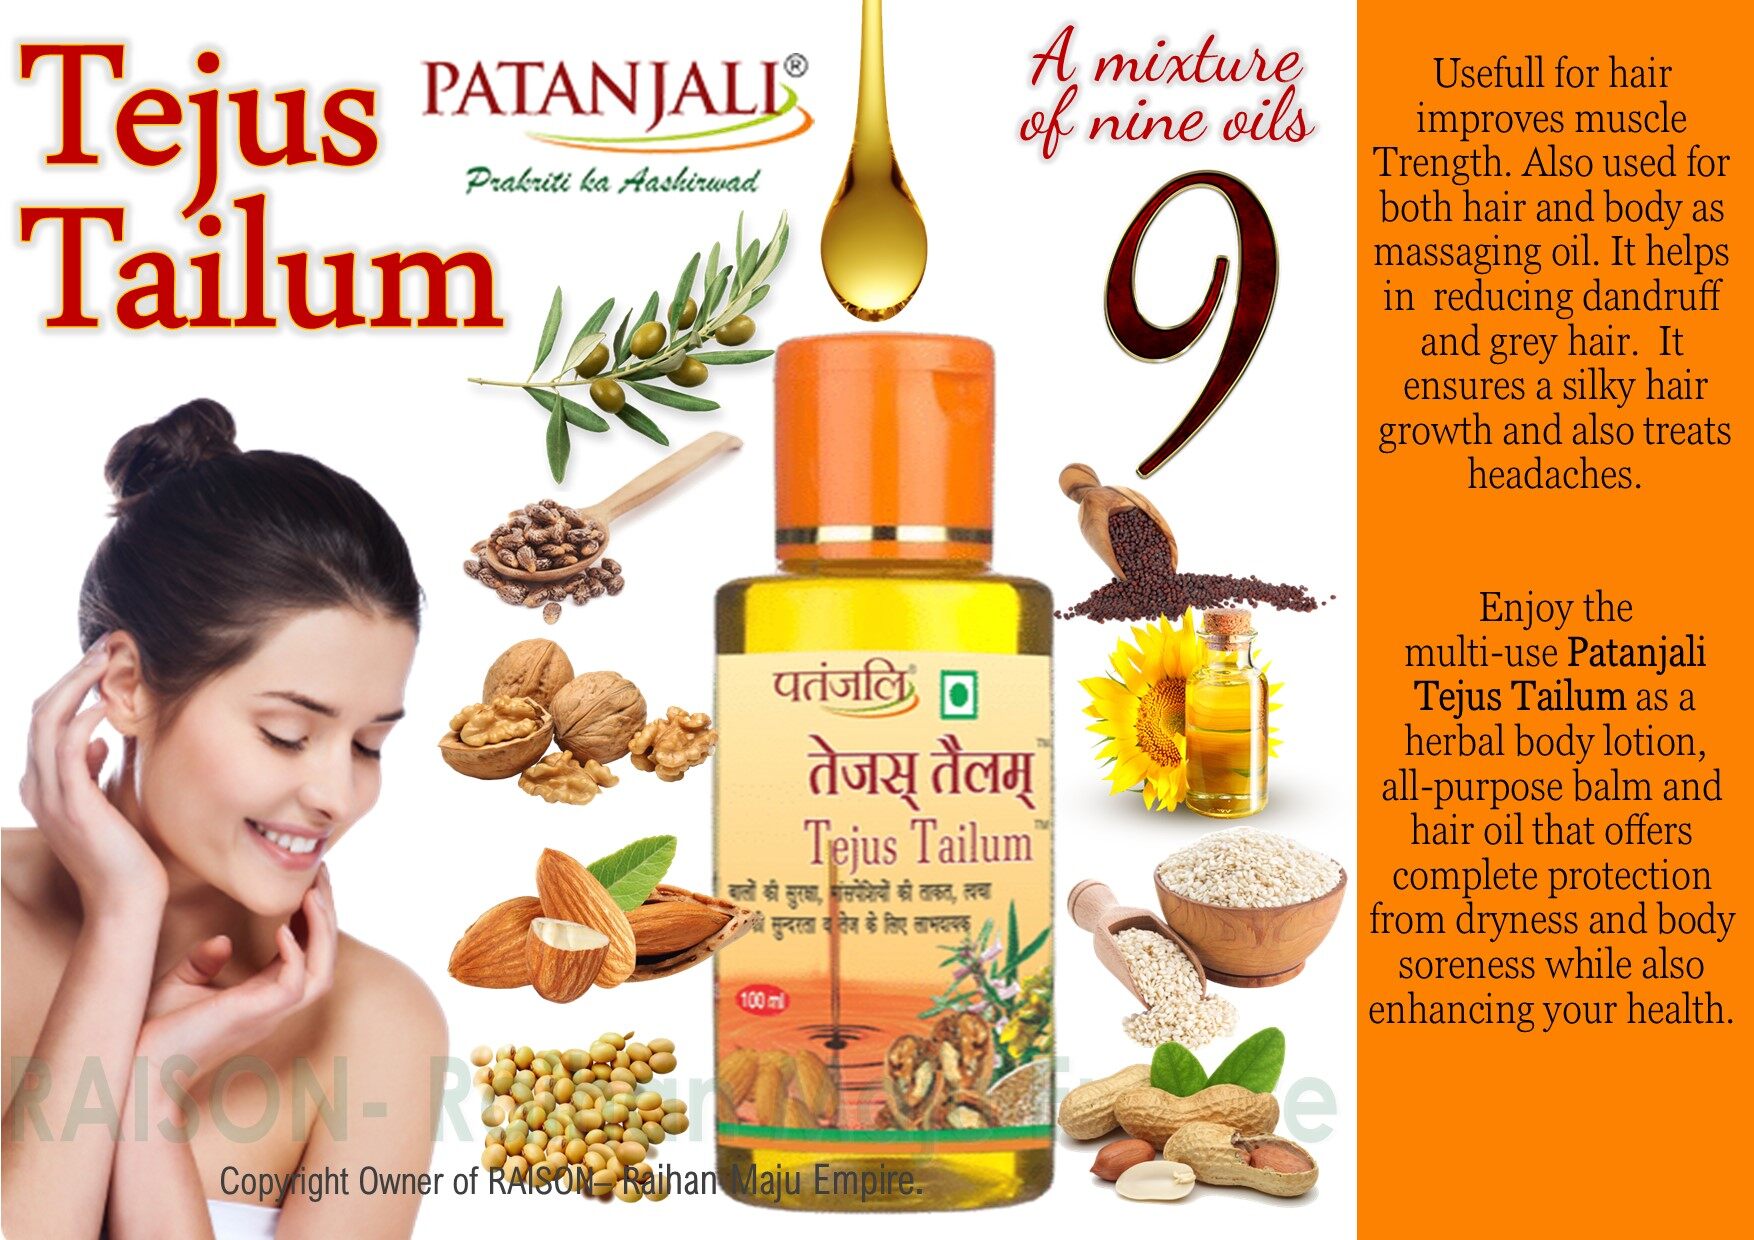 Patanjali Tejus Tailum 100ml- Ayurvedic Oil used for both hair and body as  massaging oil. It helps in reducing dandruff and grey hair. It ensures a  silky hair growth and also treats